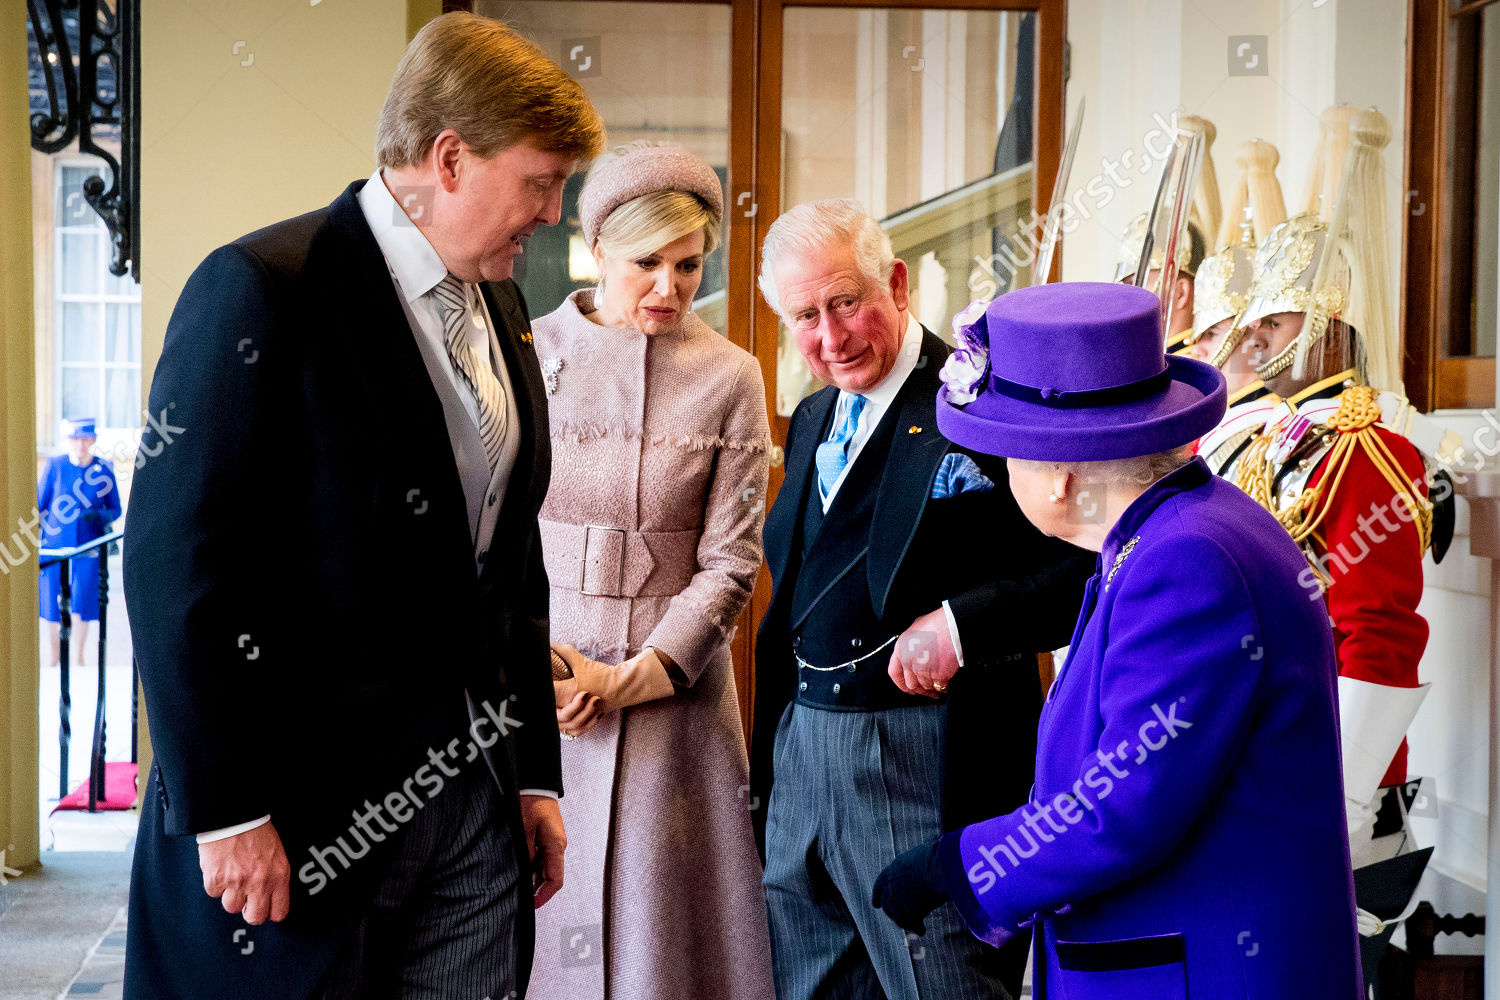 state-visit-of-the-king-and-queen-of-the-netherlands-london-uk-shutterstock-editorial-9942301cc.jpg